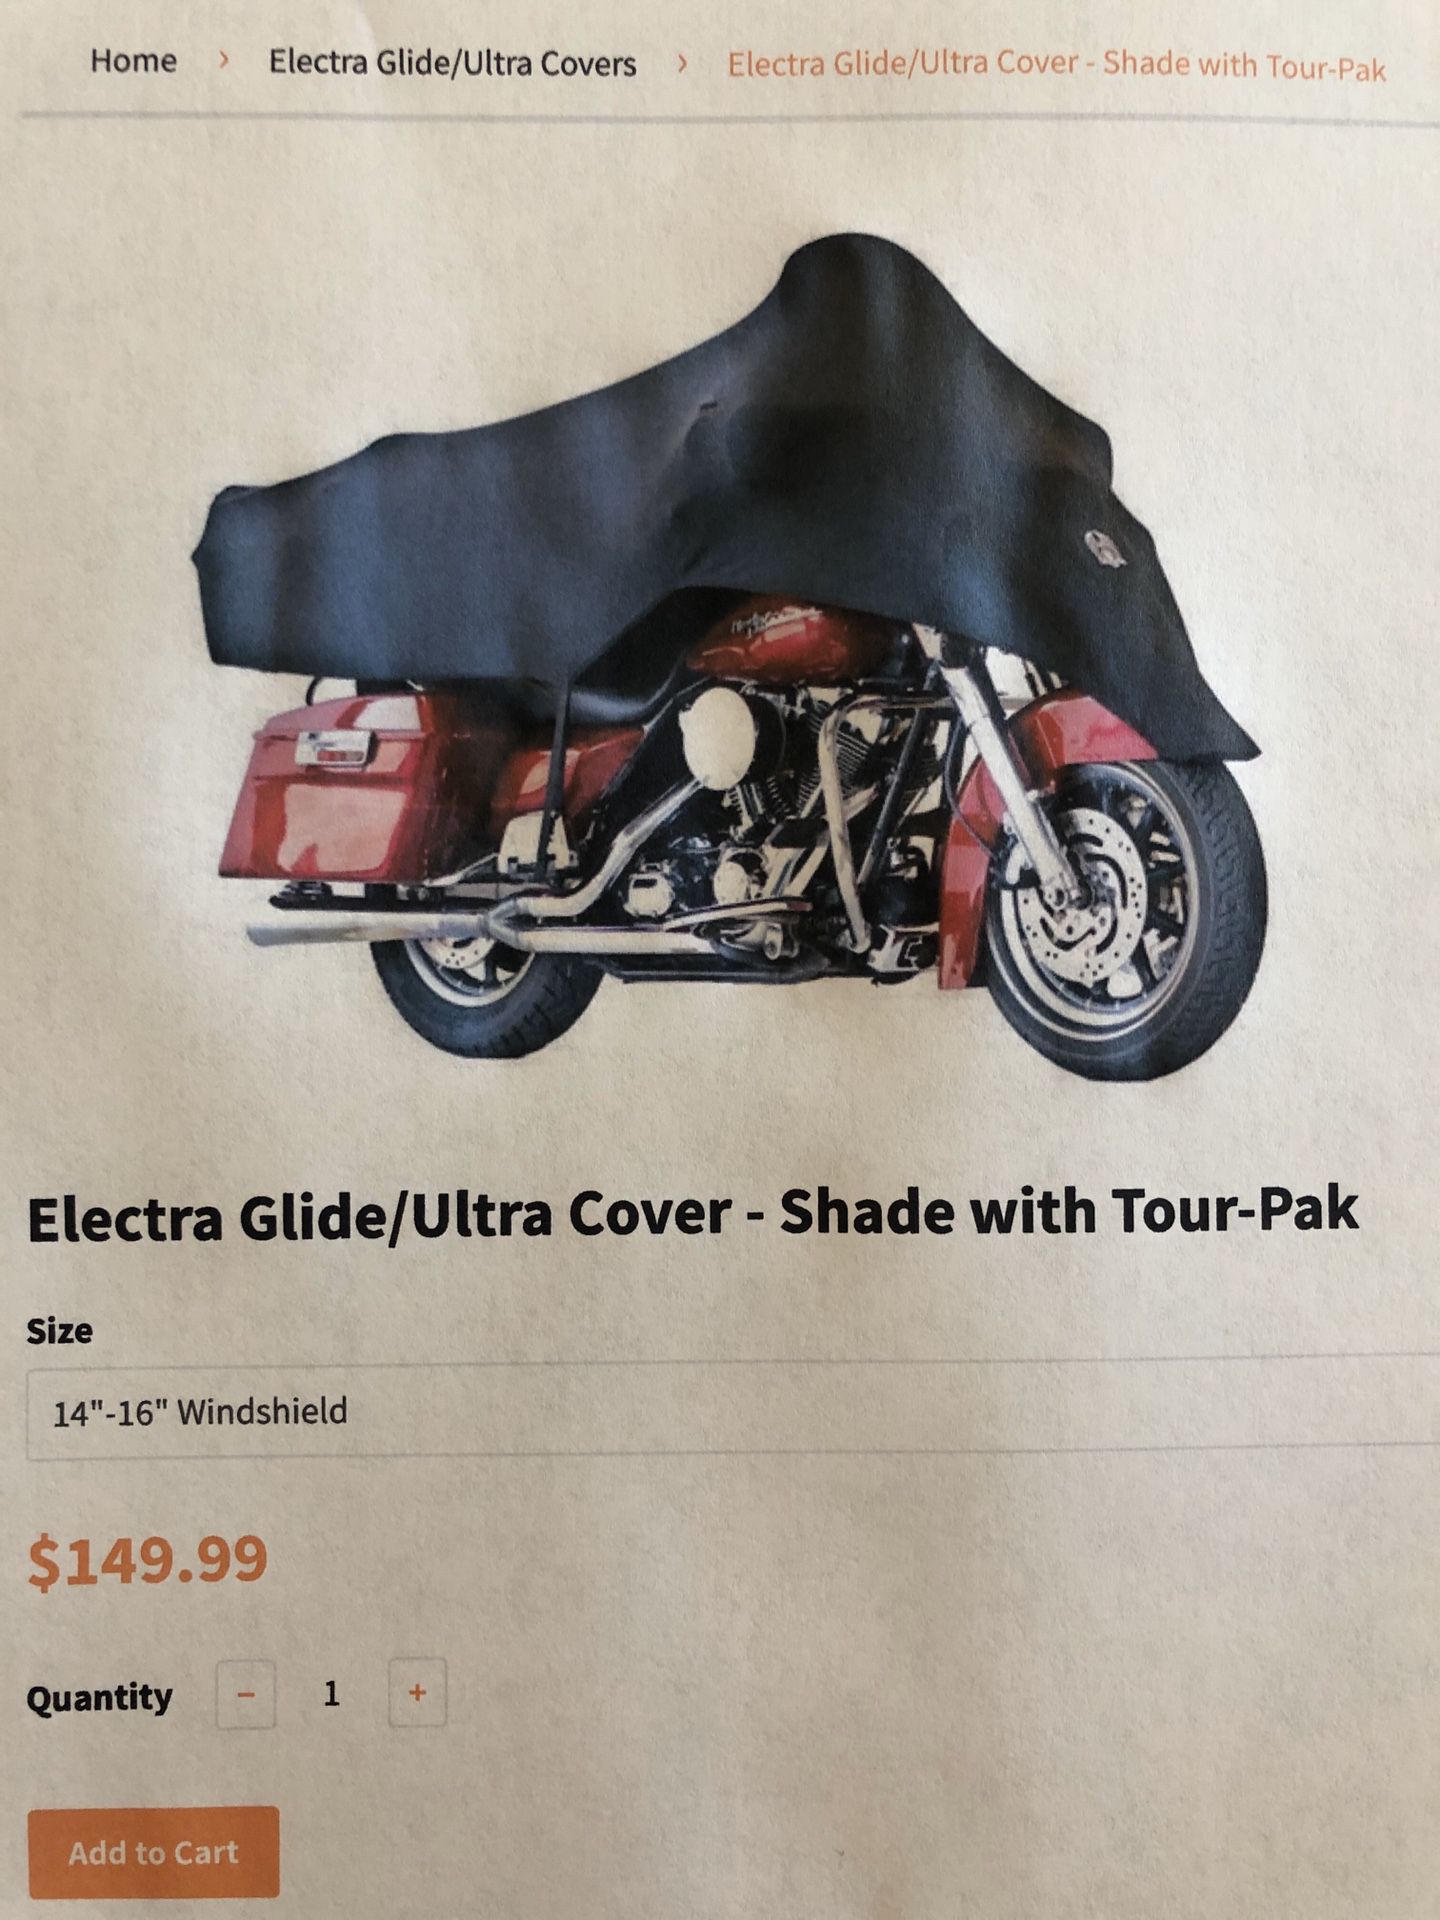 Harley-Davidson Electra Glide/Ultra Cover-Shade with Tour-Pak